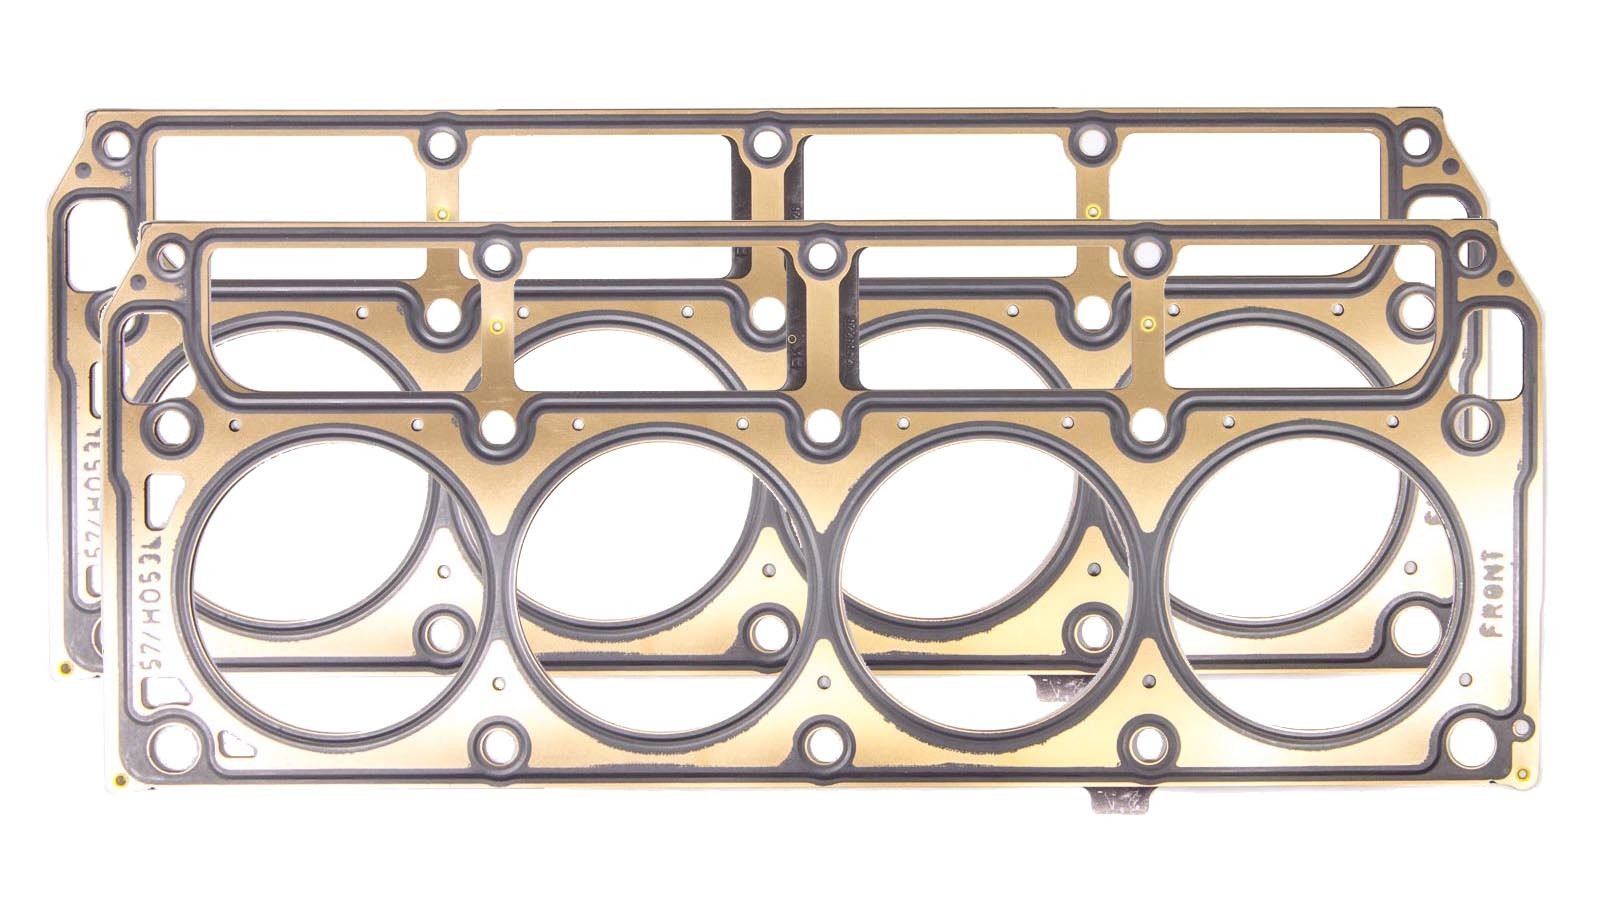 Chevrolet Performance 12498544 Cylinder Head Gasket, 3.920 in Bore, 0.051 in Compression Thickness, Multi-Layer Steel, LS1 / LS6, GM LS-Series, Pair